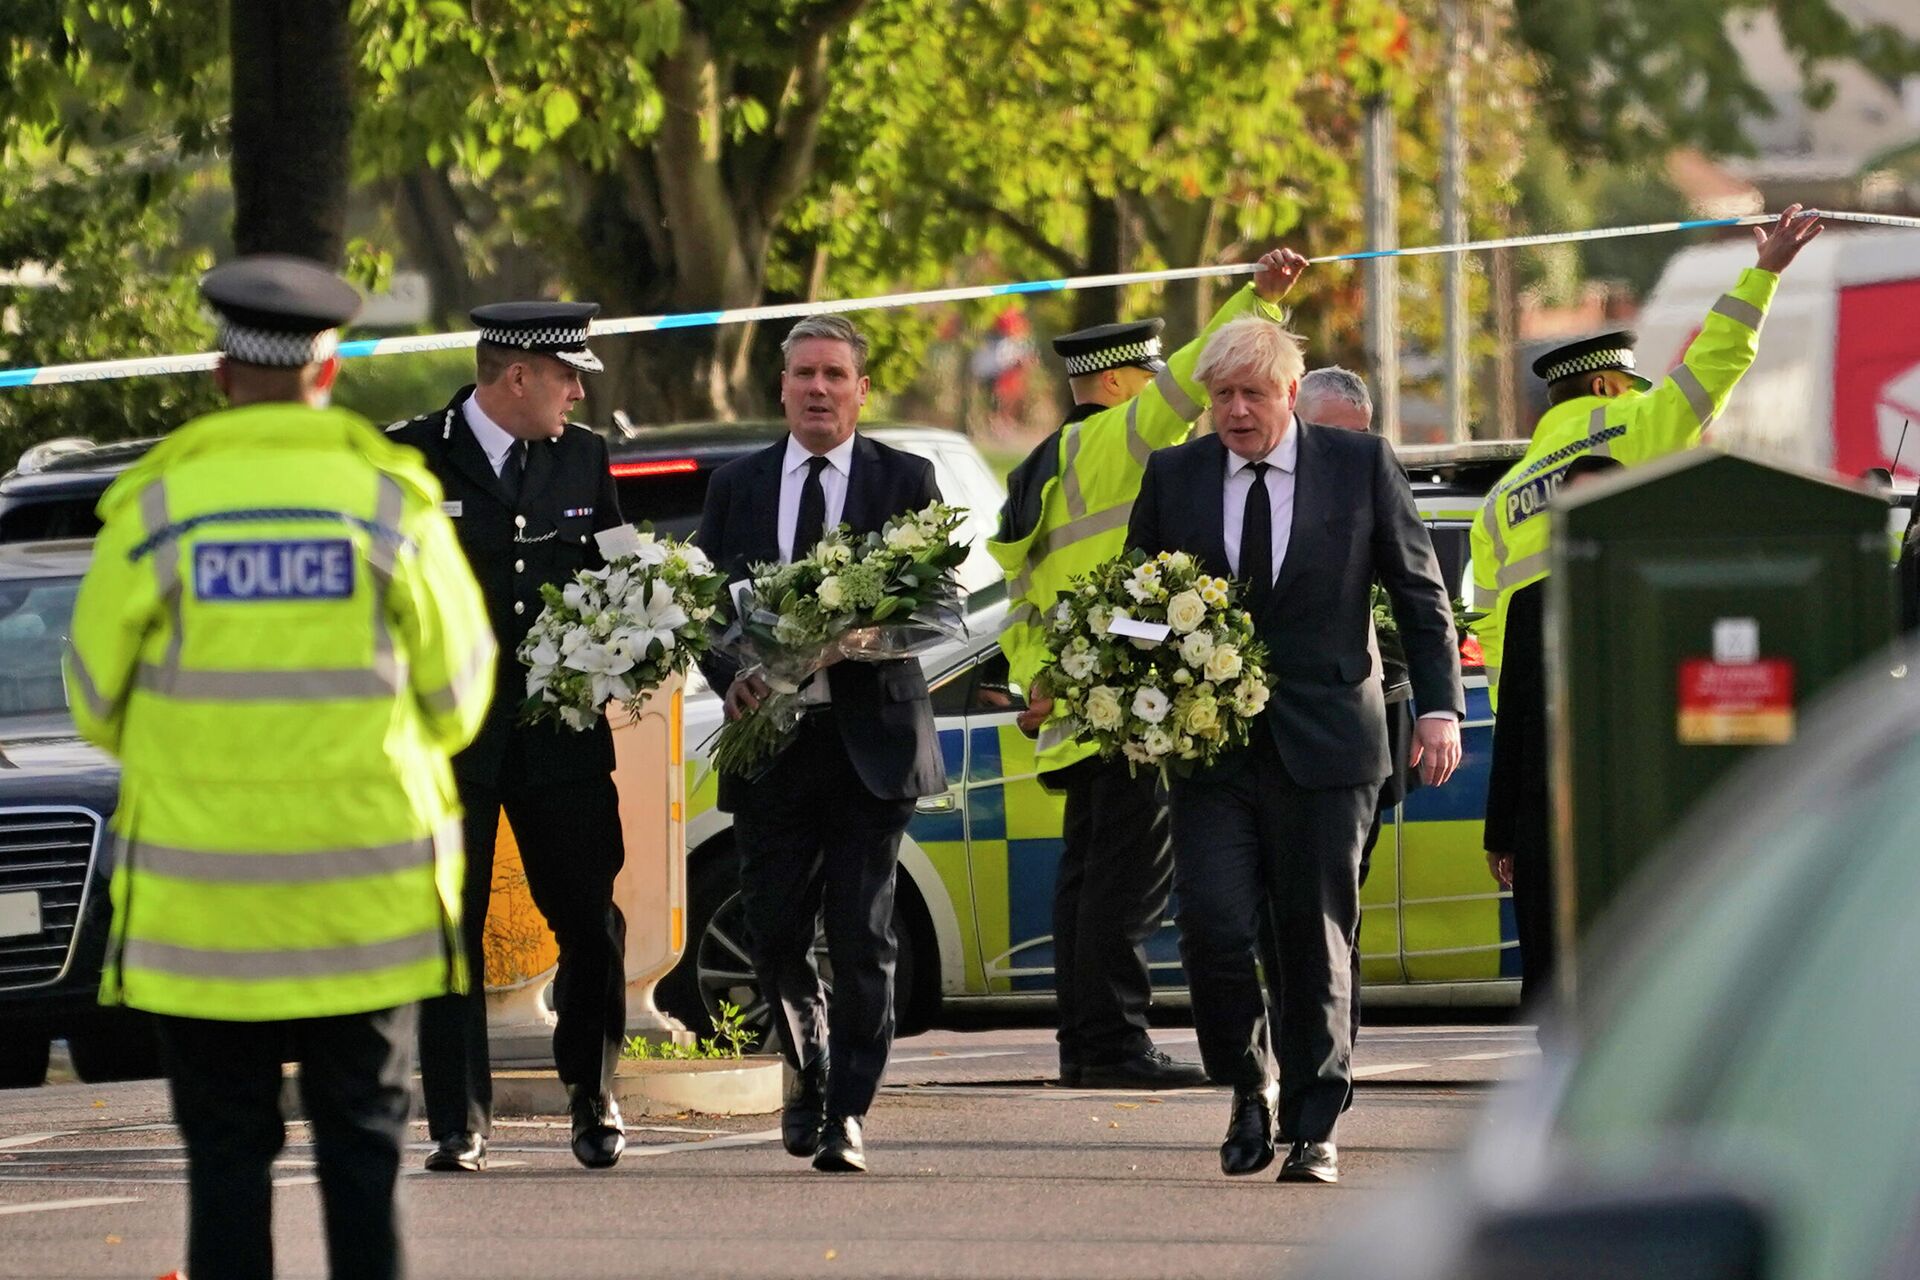 British Prime Minister Boris Johnson, right, and Leader of the Labour Party Sir Keir Starmer, second from right, carry flowers as they arrive at the scene where a member of Parliament was stabbed Friday, in Leigh-on-Sea, Essex, England, Saturday, Oct. 16, 2021 - Sputnik International, 1920, 21.10.2021